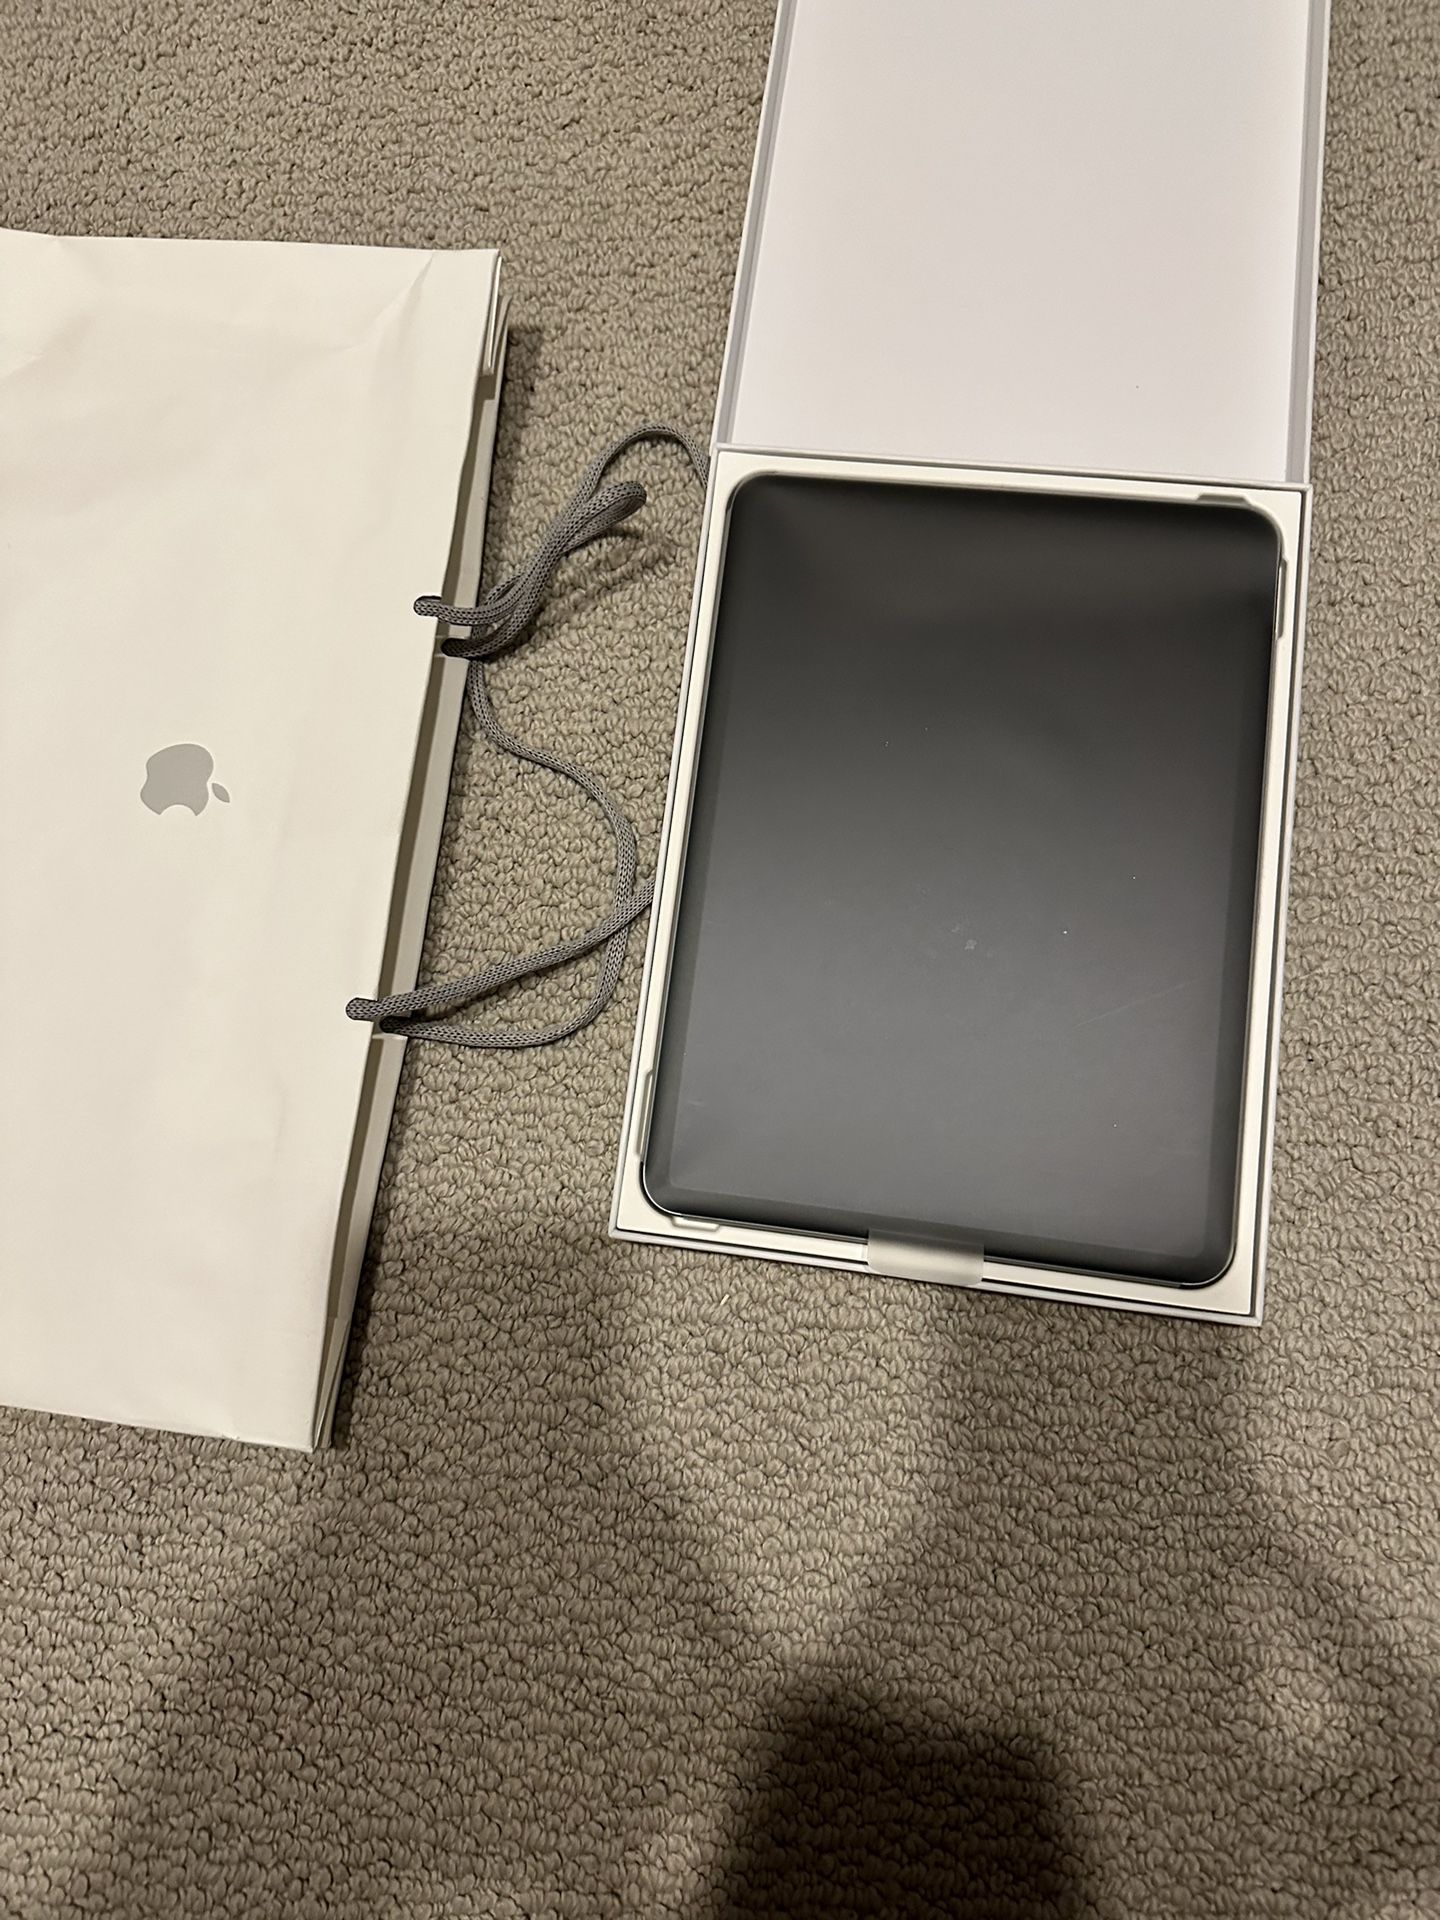 iPad Pro 11 AppleCare+ Keyboard Package  Trade For MacBook Pro 